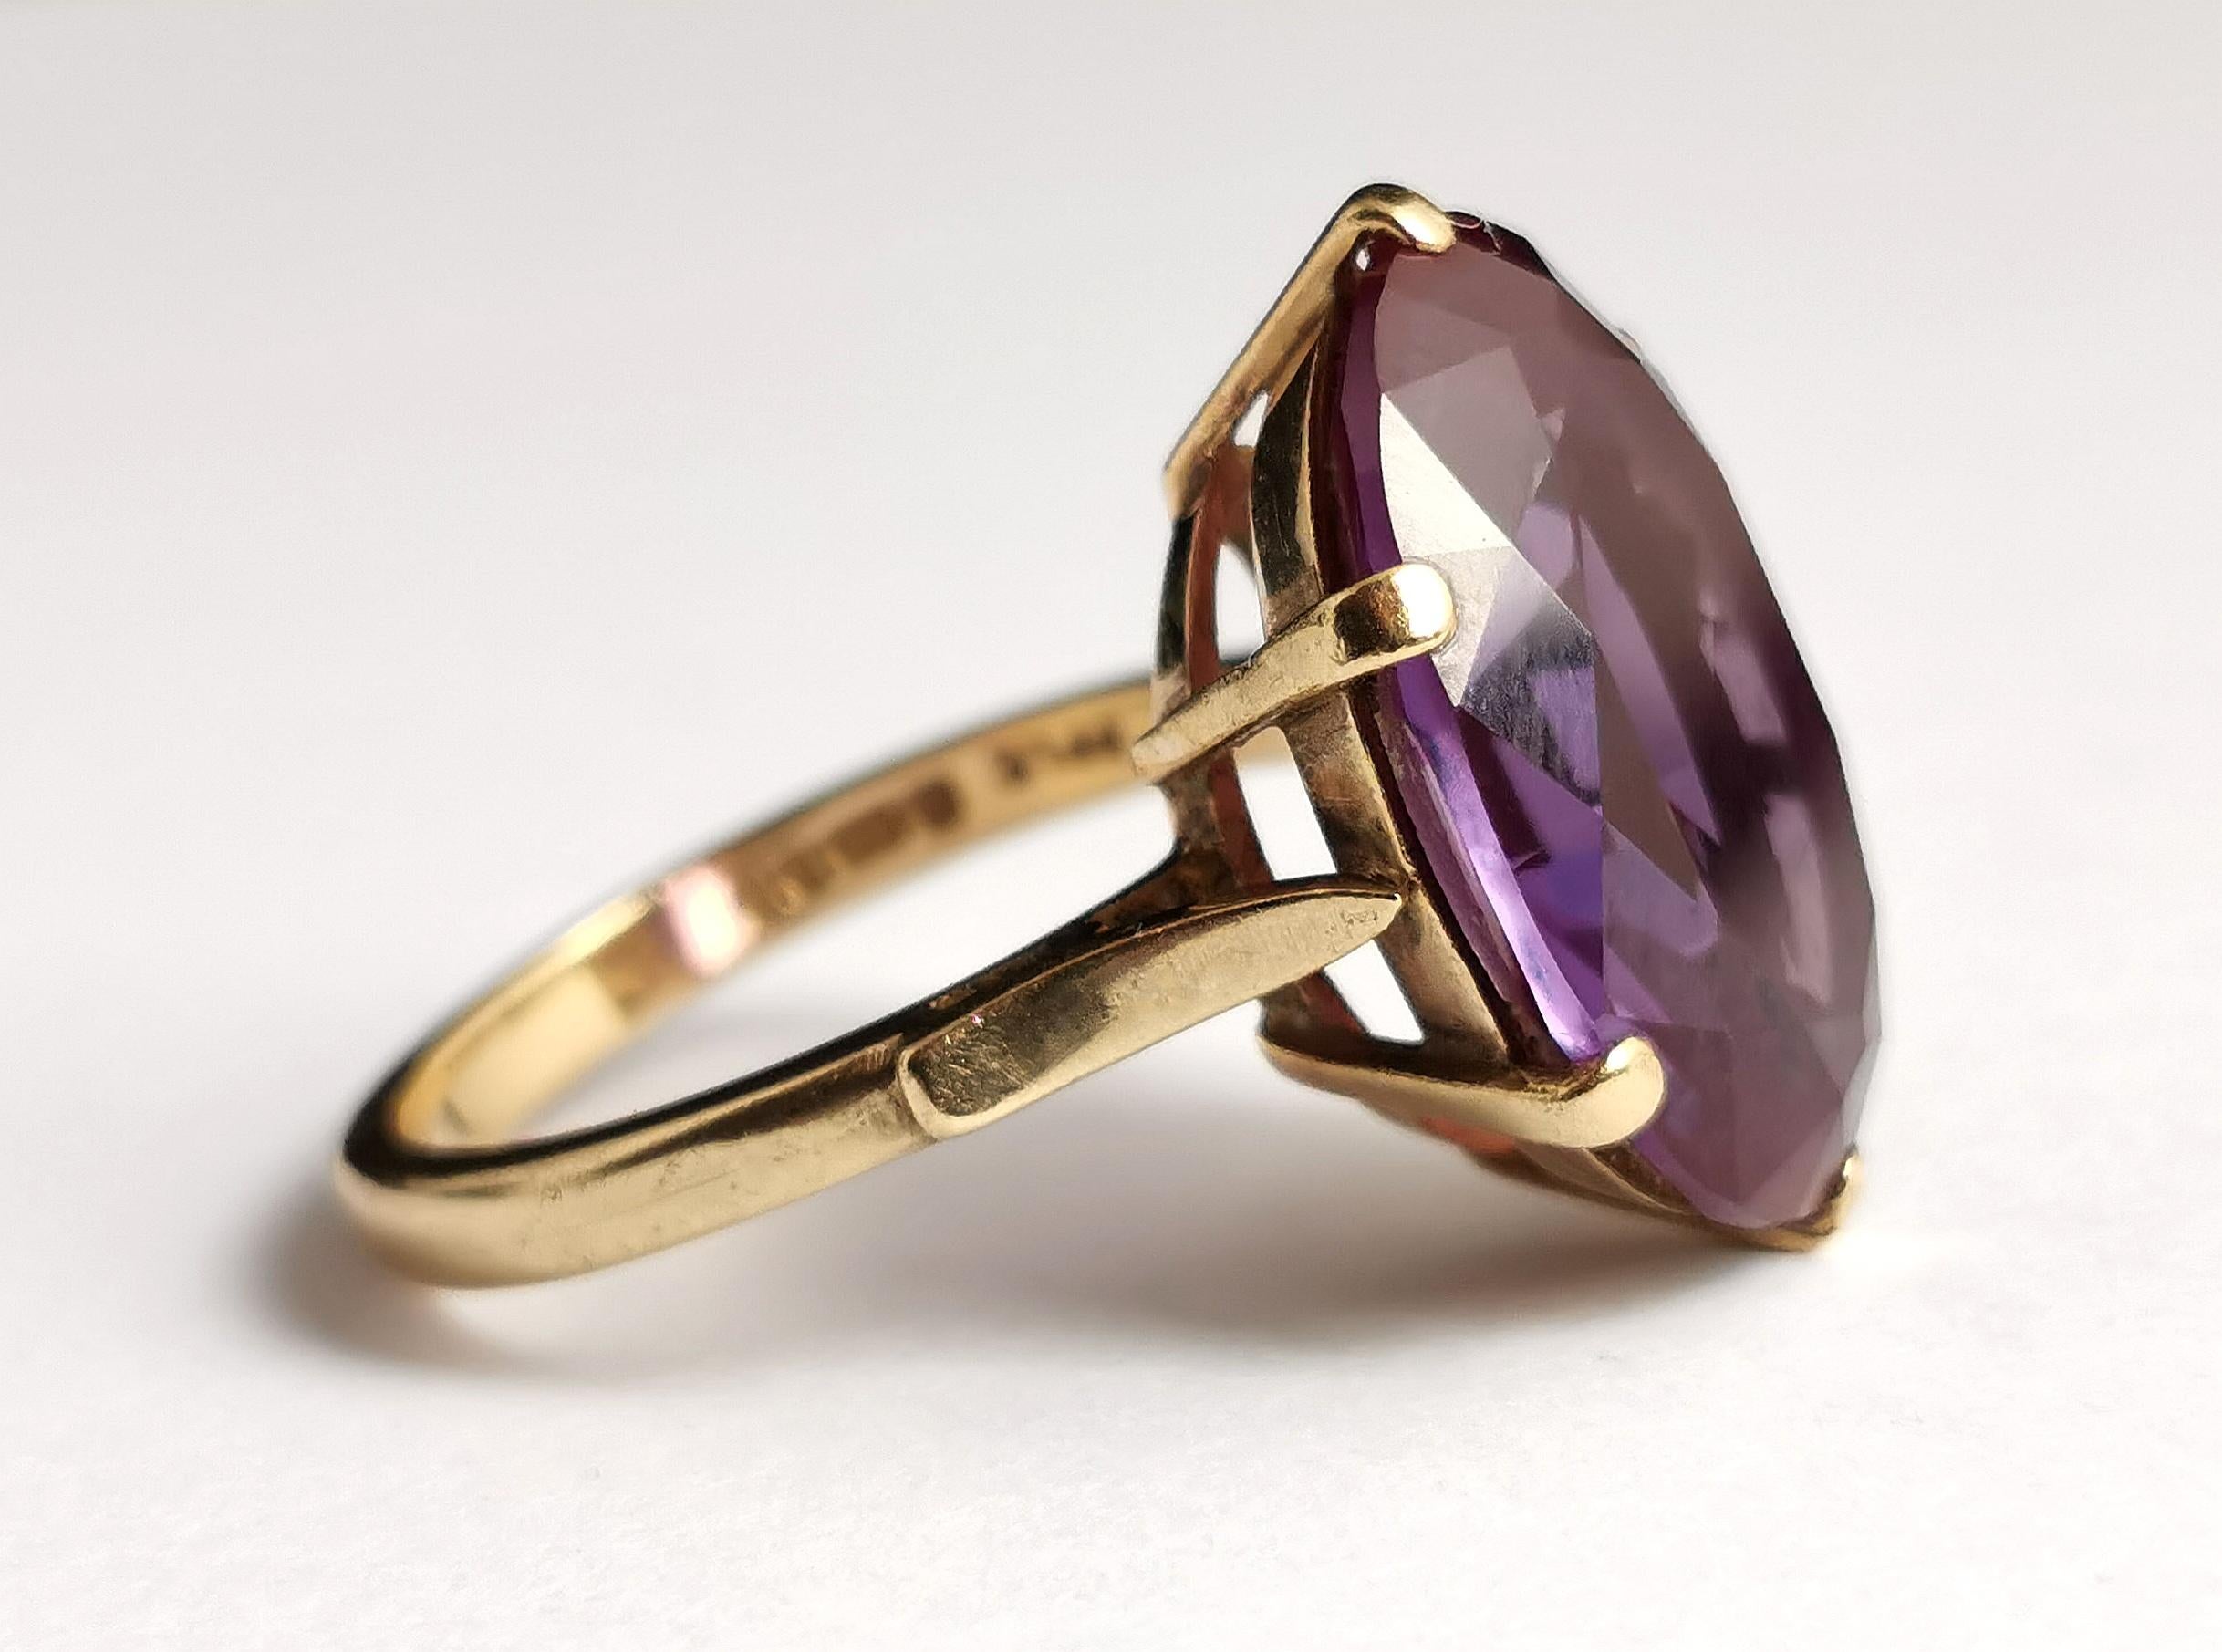 Vintage Colour Change Sapphire Cocktail Ring, 9k Yellow Gold, Alexandrite 3